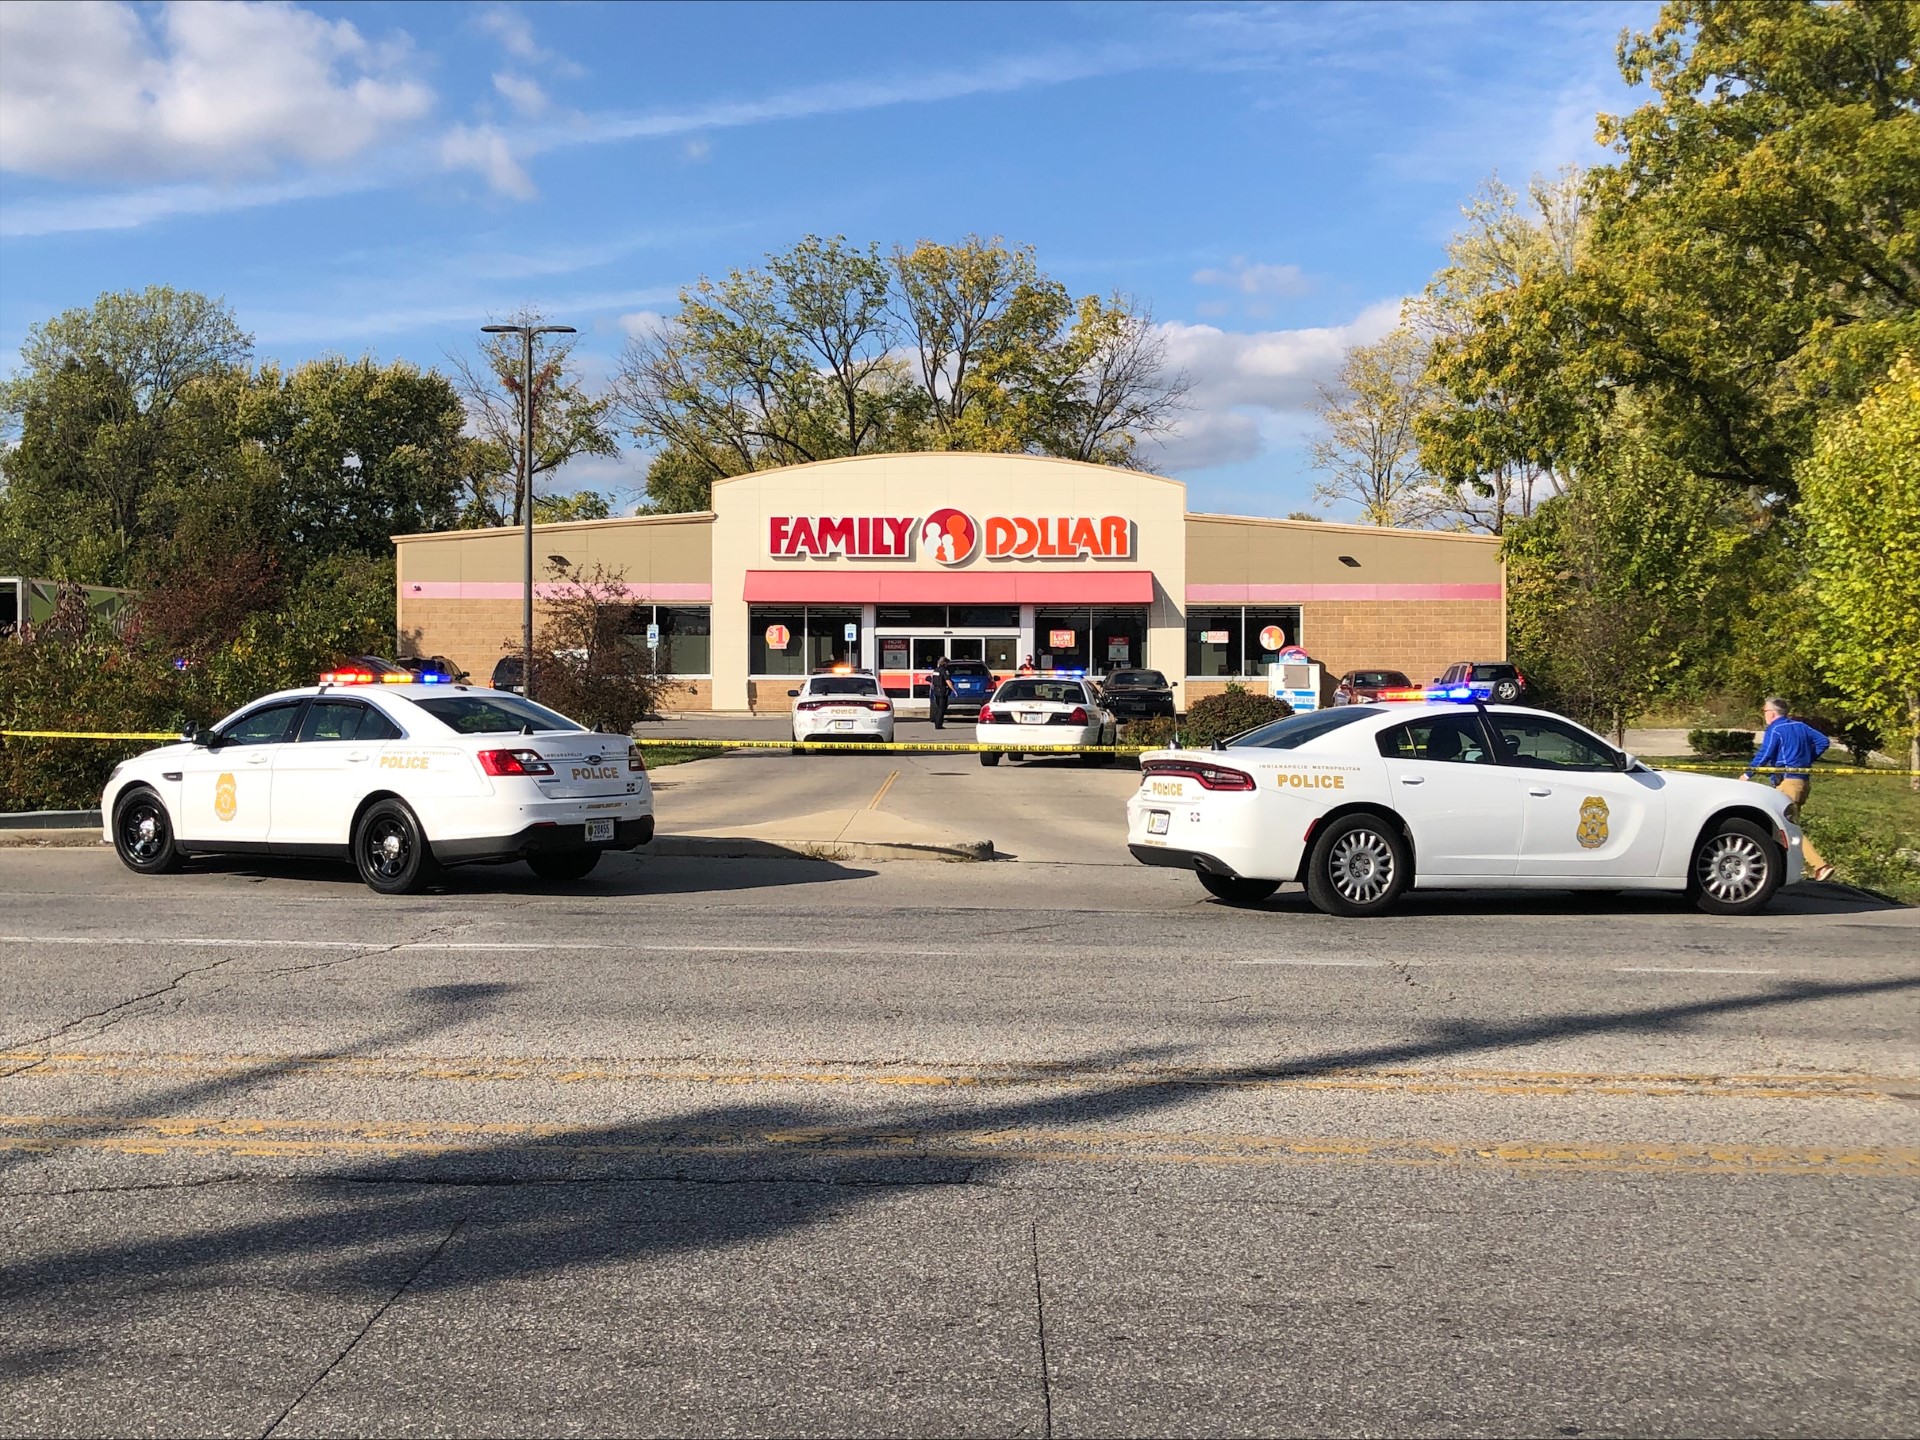 Man dies after shooting at Family Dollar on East 30th Street; 1 other critical